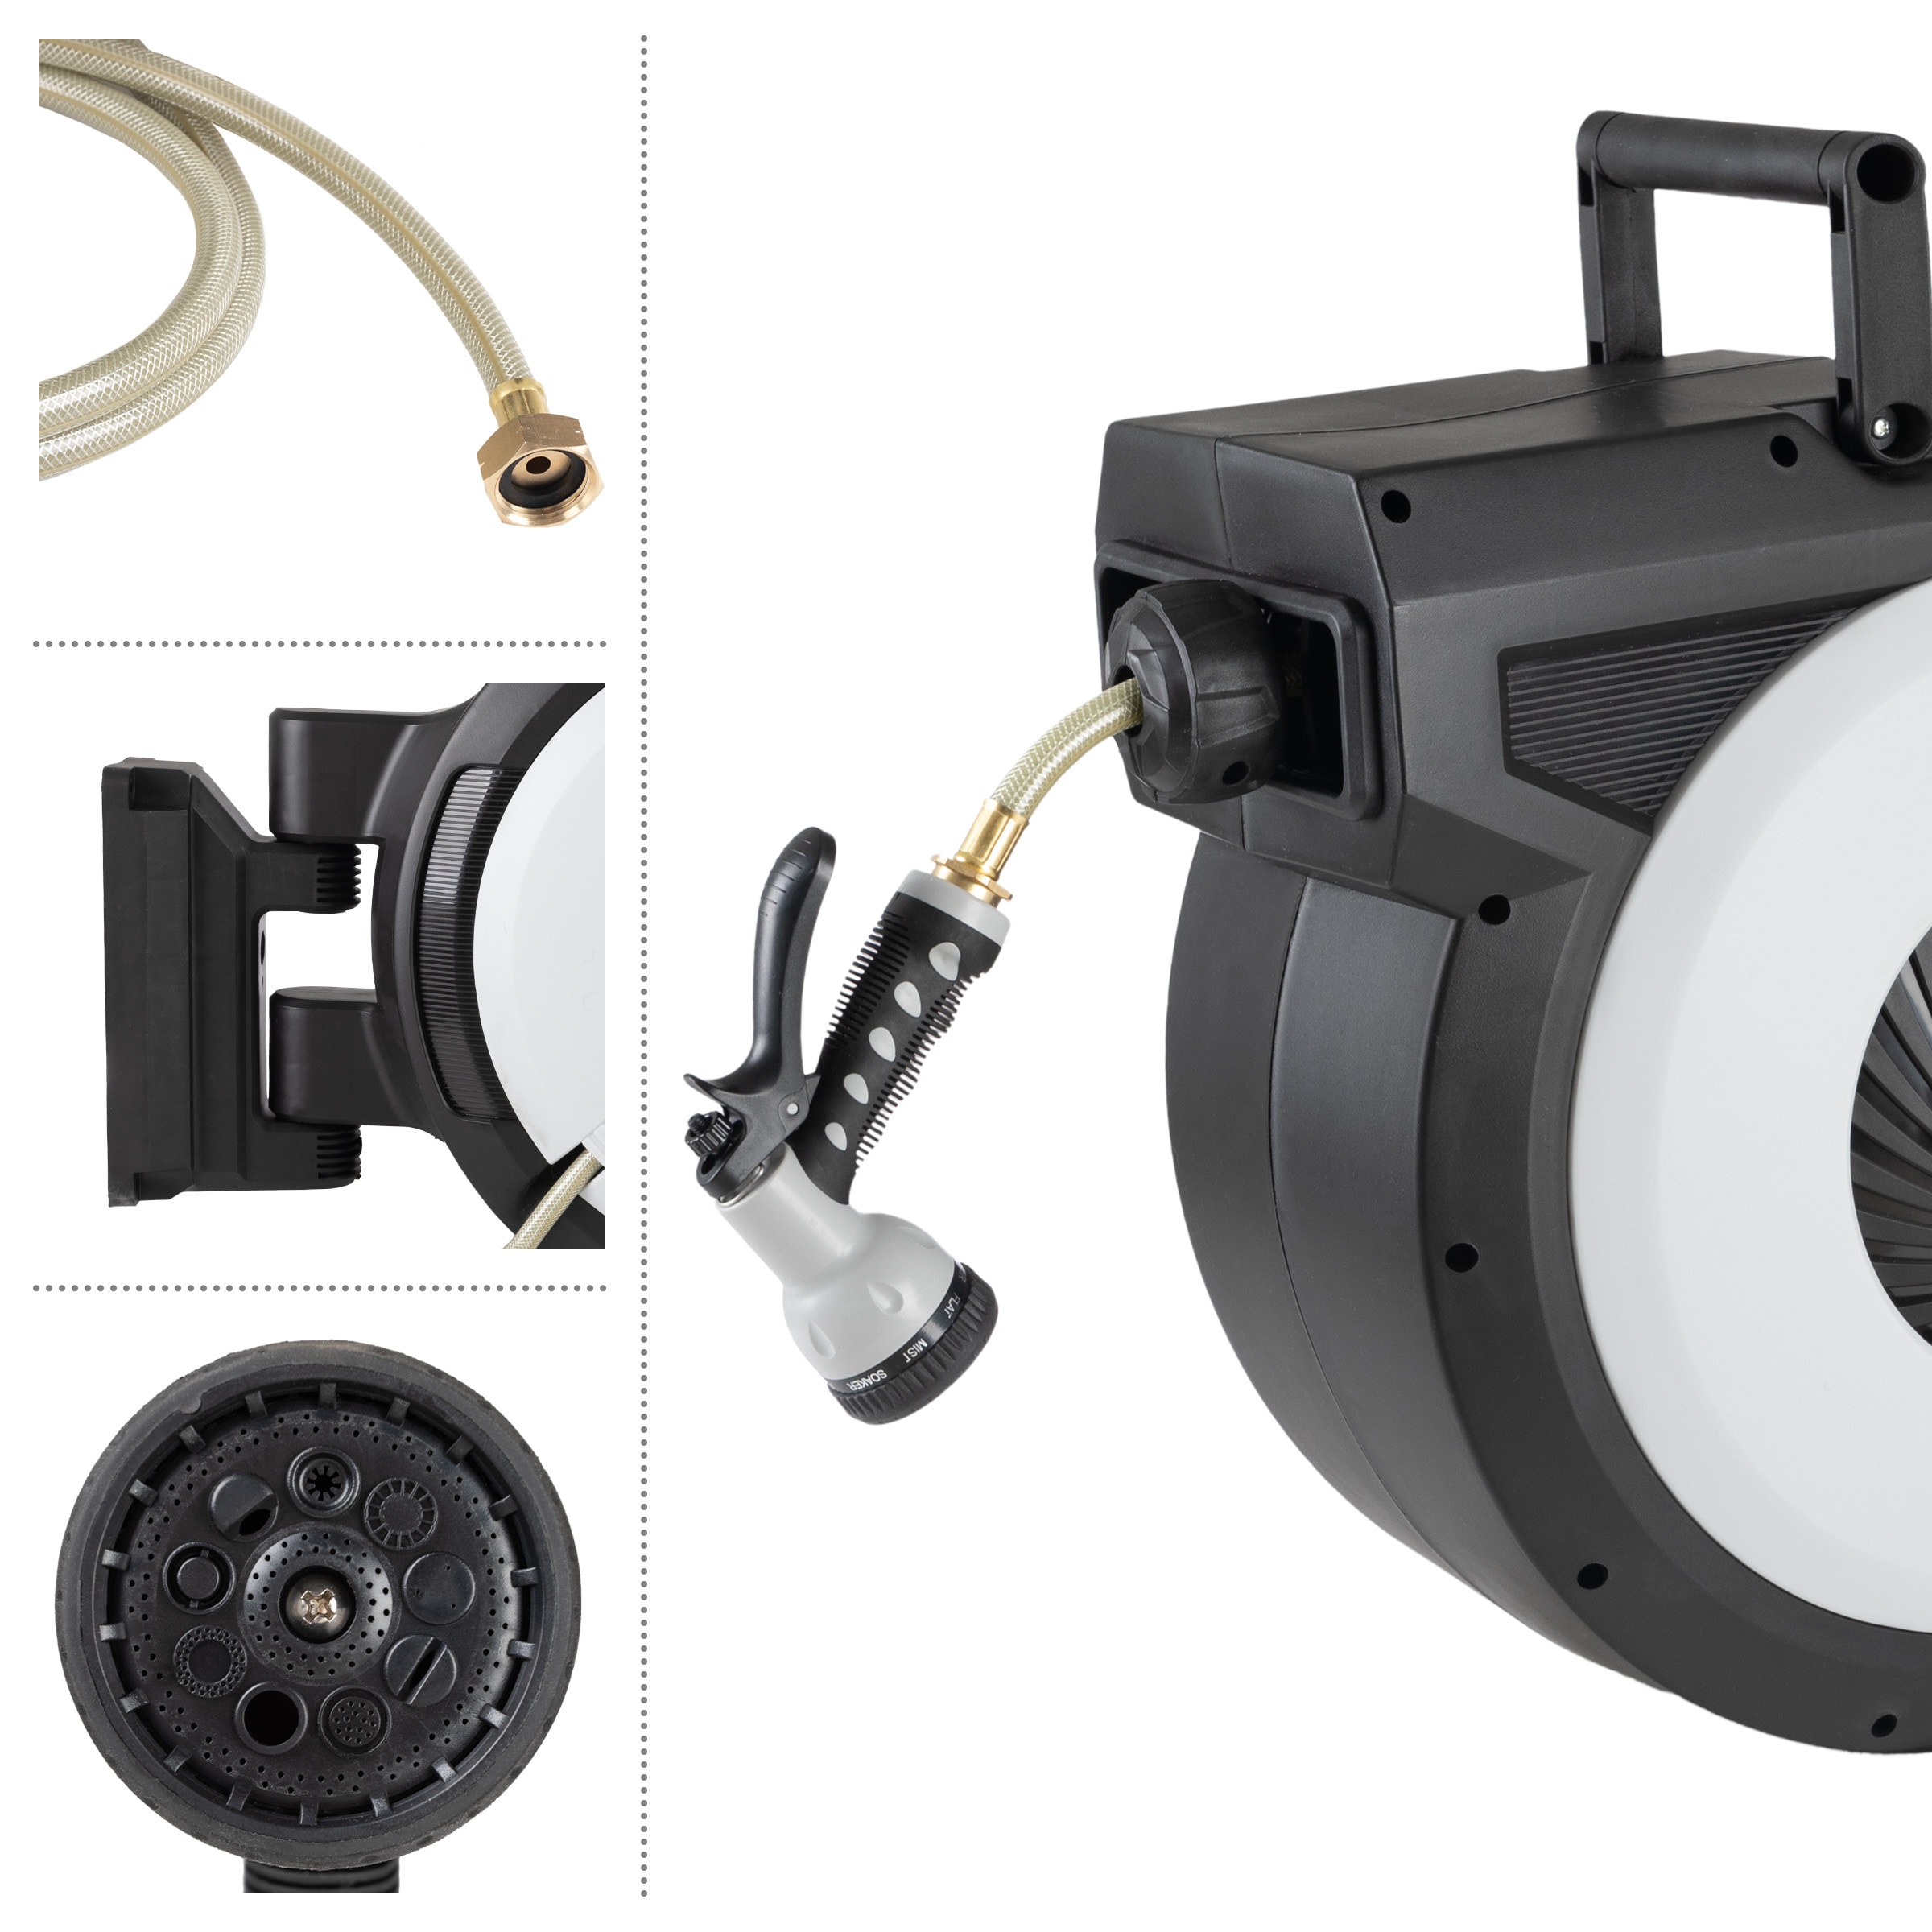 Retractable Garden Hose Reel Wall Mount 1/2 x 75 ft Retractable Hose Reel  with 10 Pattern Nozzle, Automatic Slow Rewind System/Lock Any